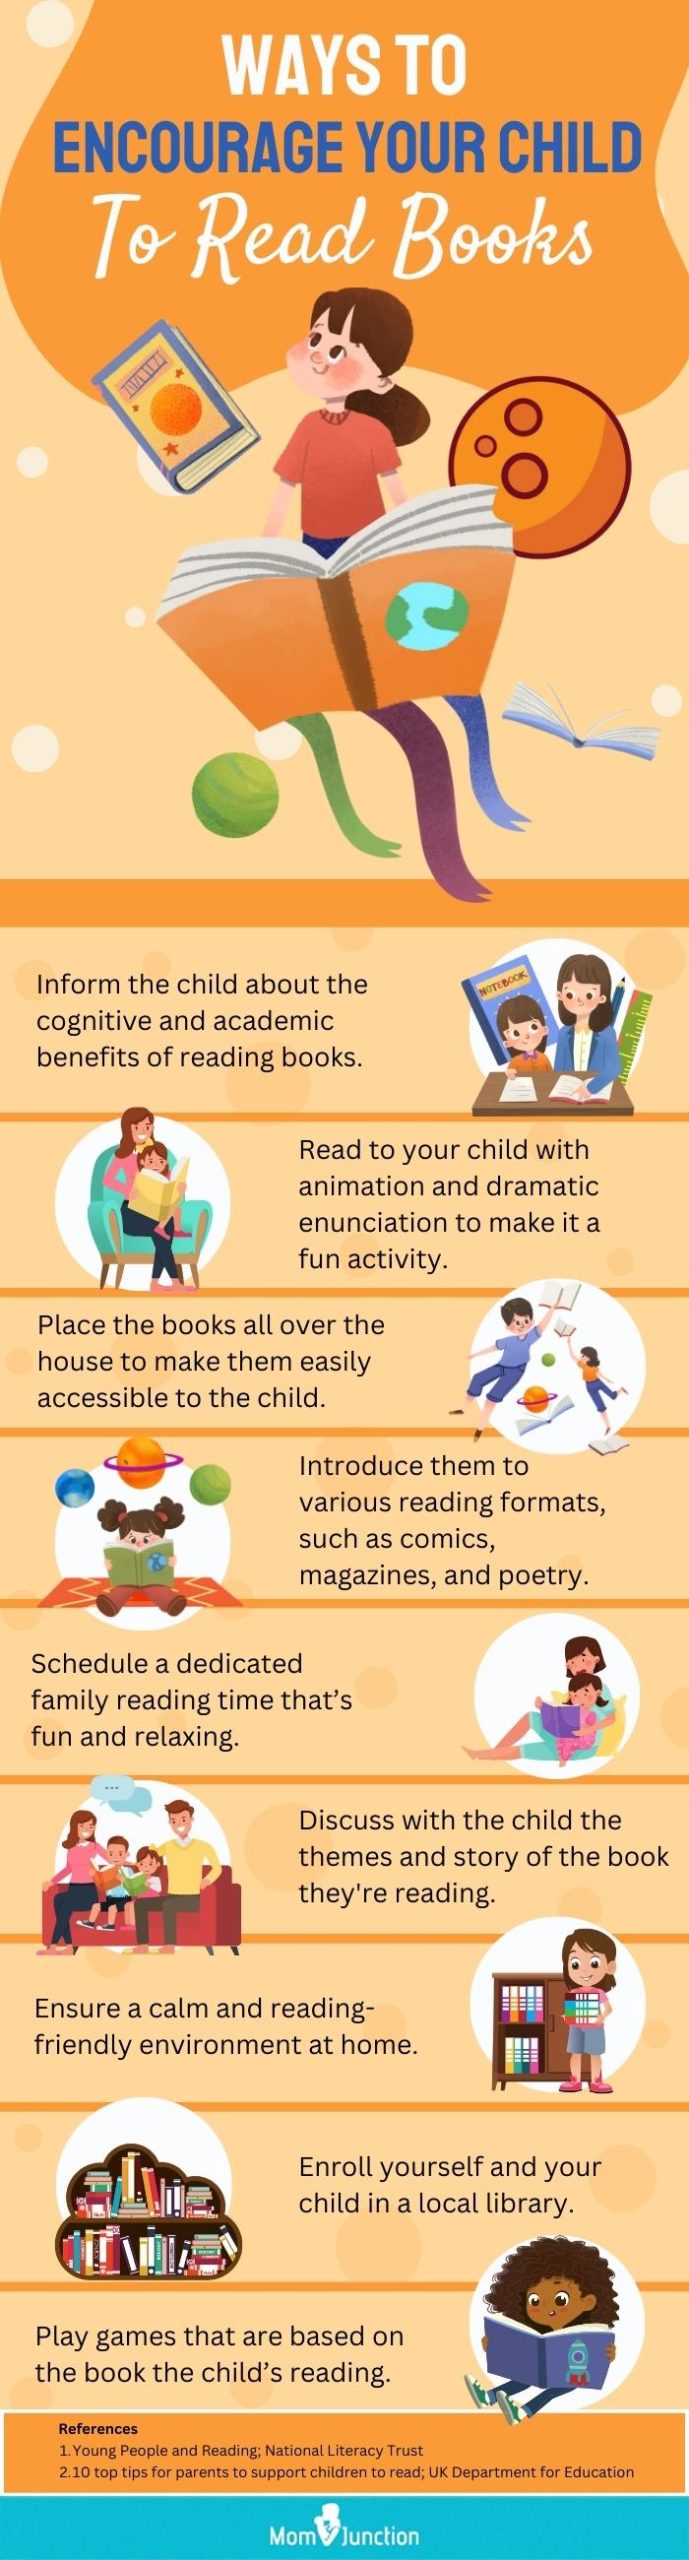 Ways To Encourage Your Child To Read Books 278 Content topics